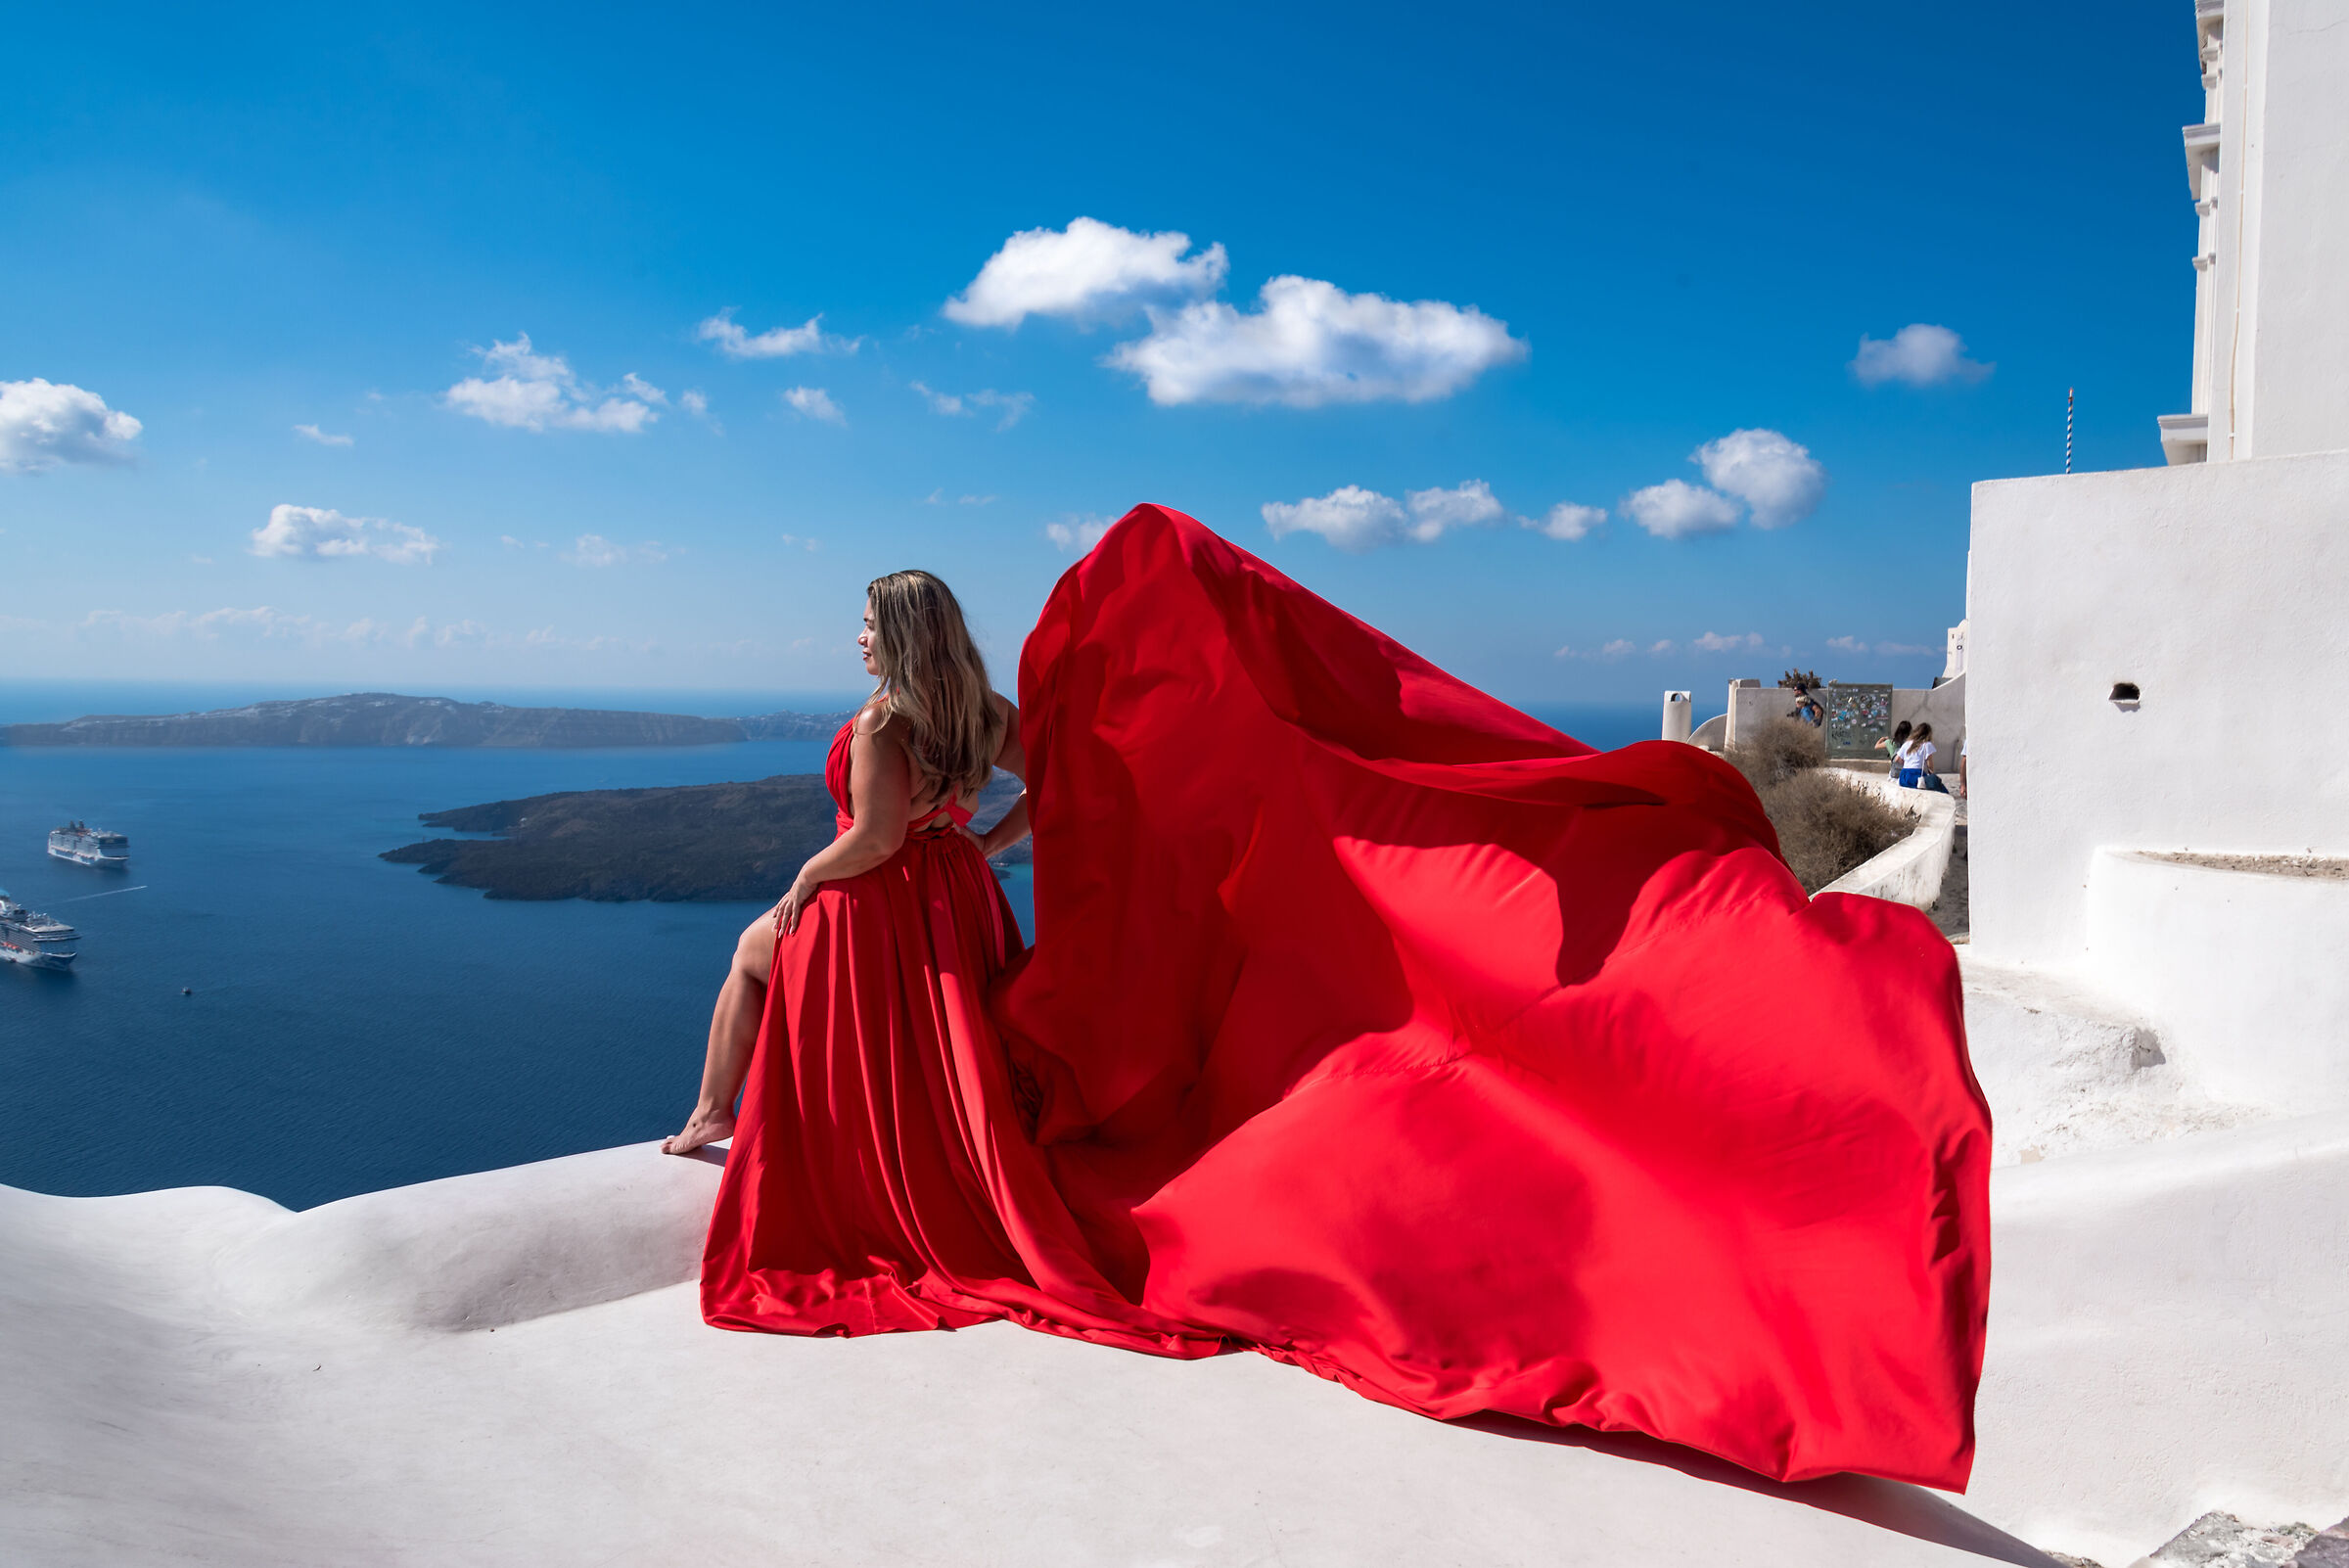 In Santorini a fiery red October...